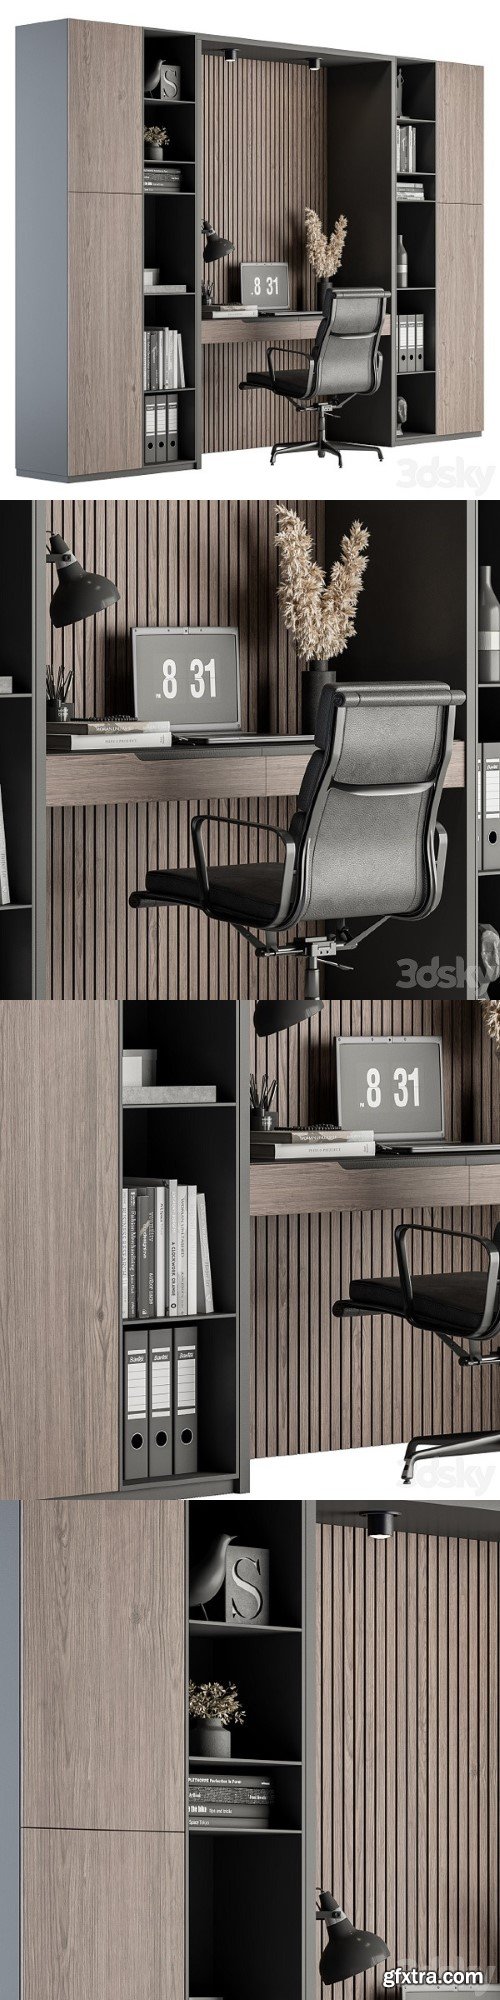 Office Furniture Home Office 19